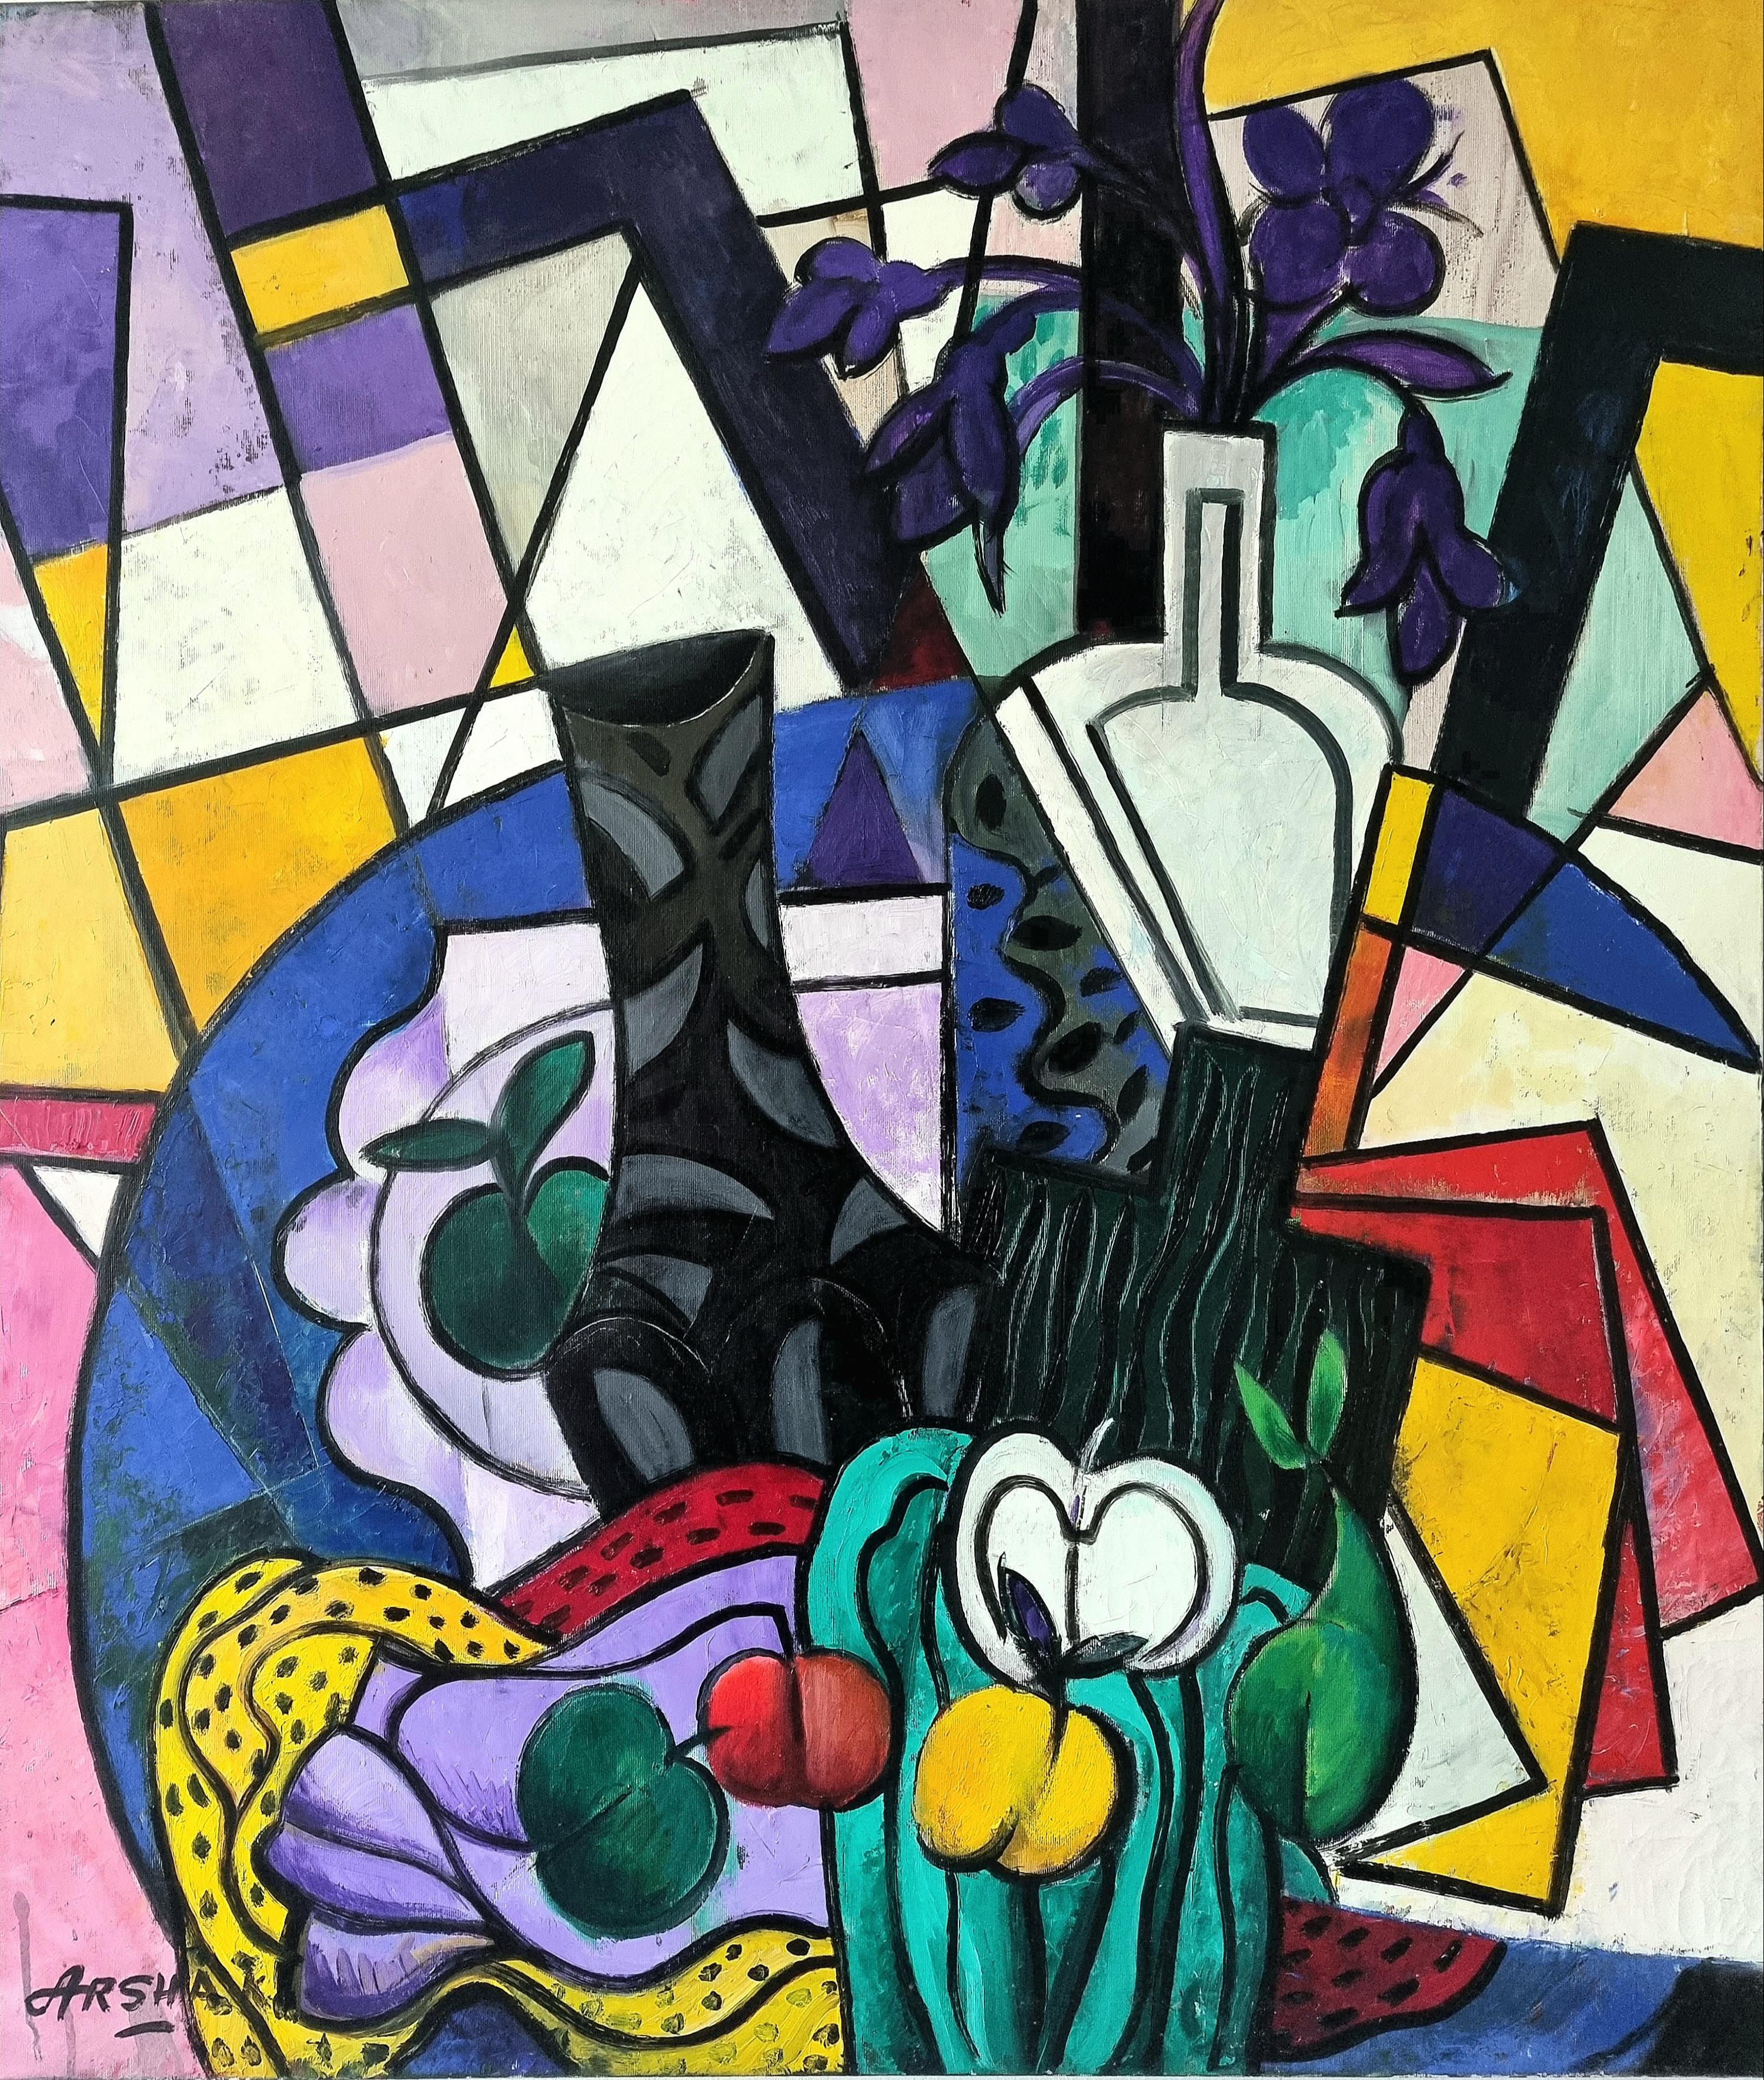  Still Life, Shapes Colors - Cubist Red Black Yellow White Green Blue Purple